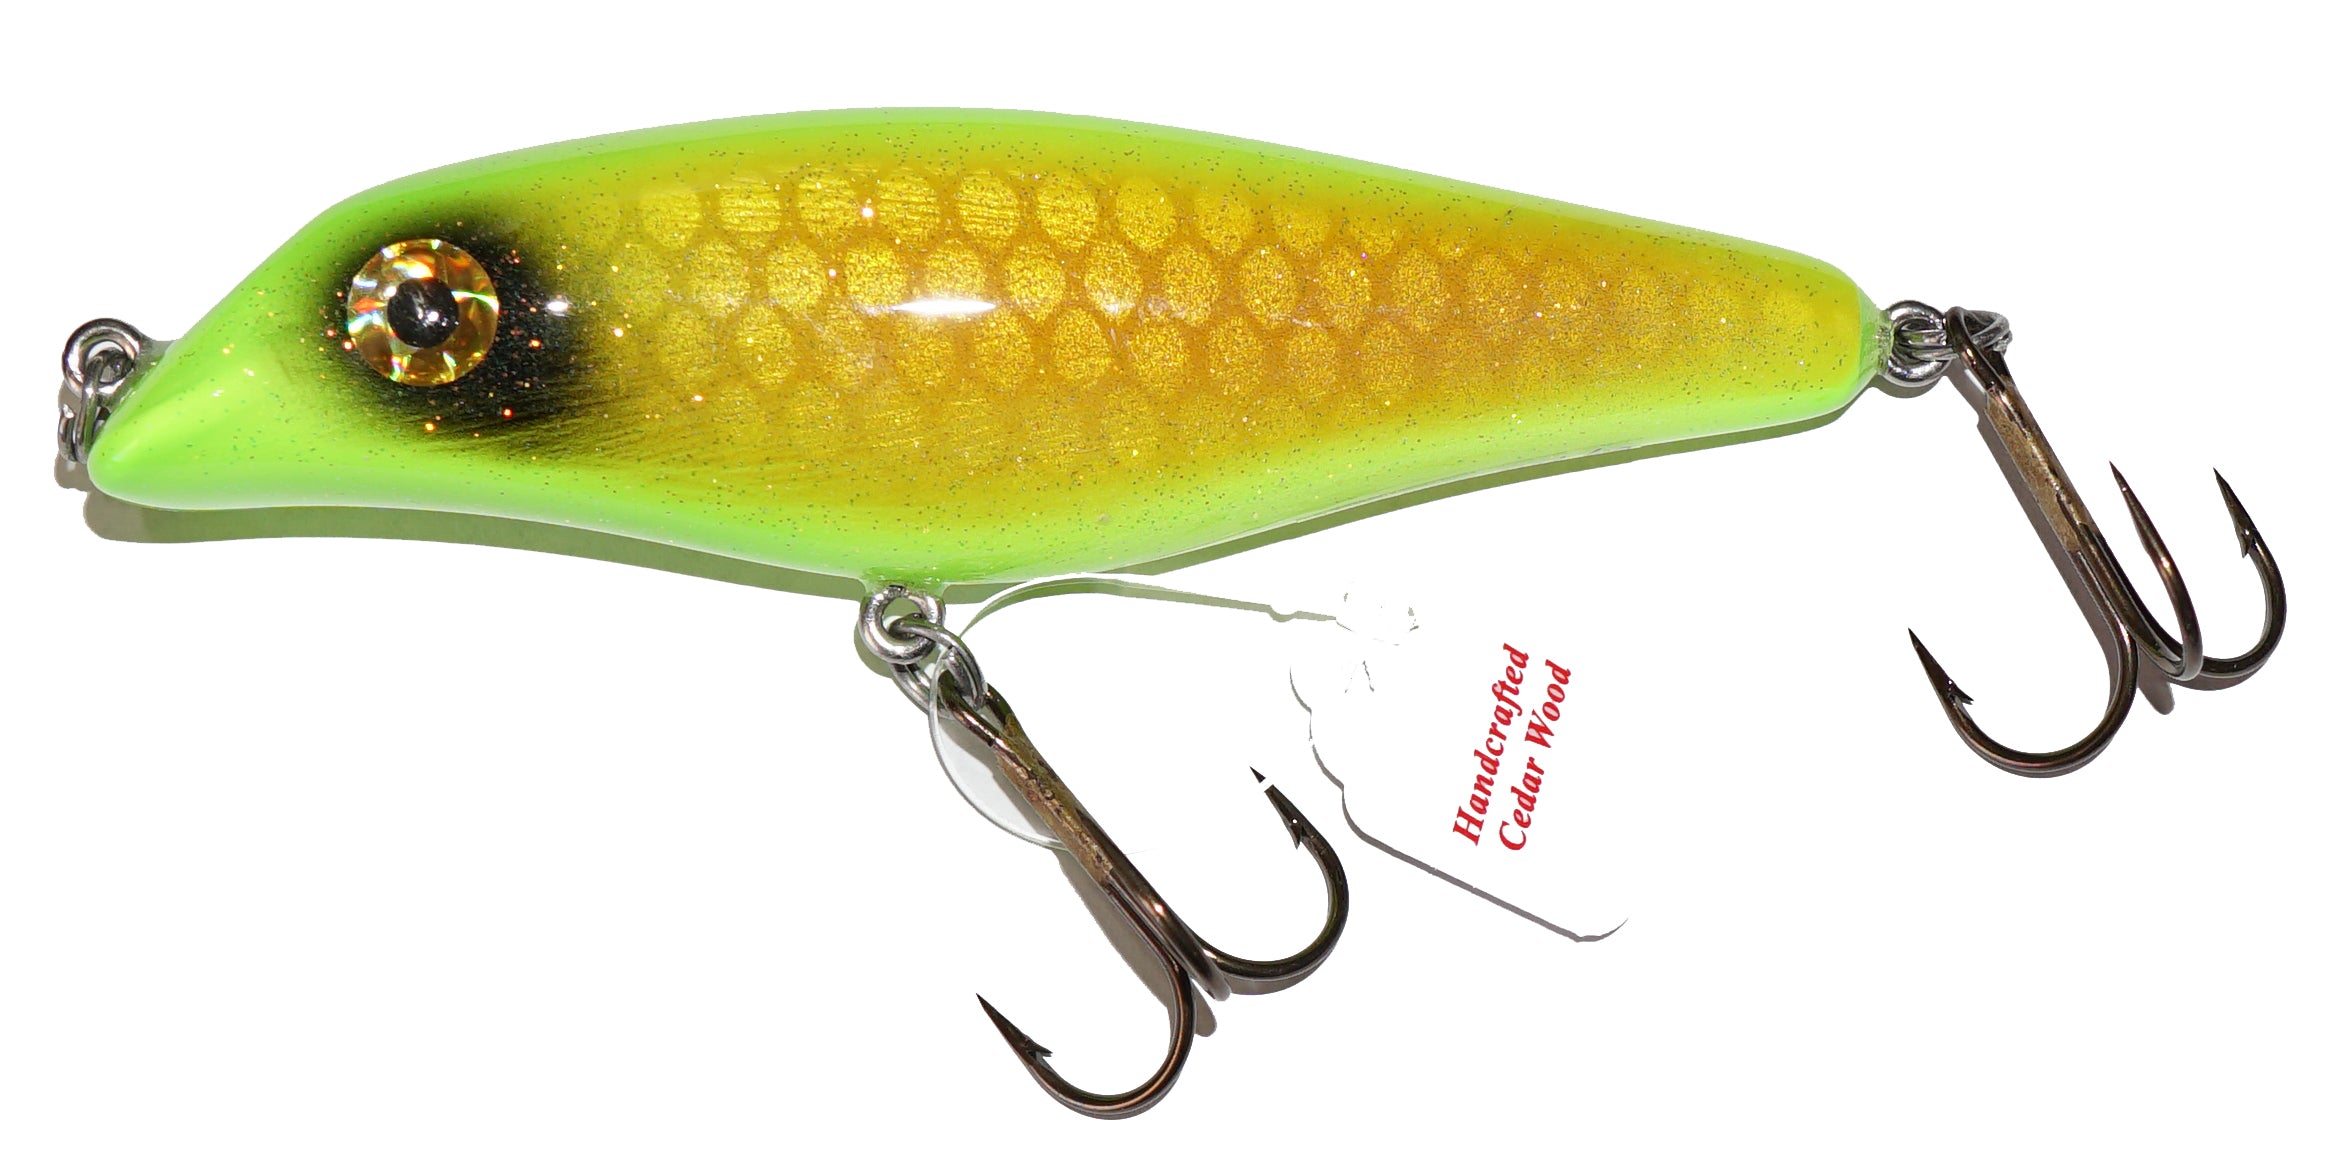 Musky Lures - Handcrafted cedar wood lures for northern pike, musky,  walleye and bass. Big Fork Lures Official Site